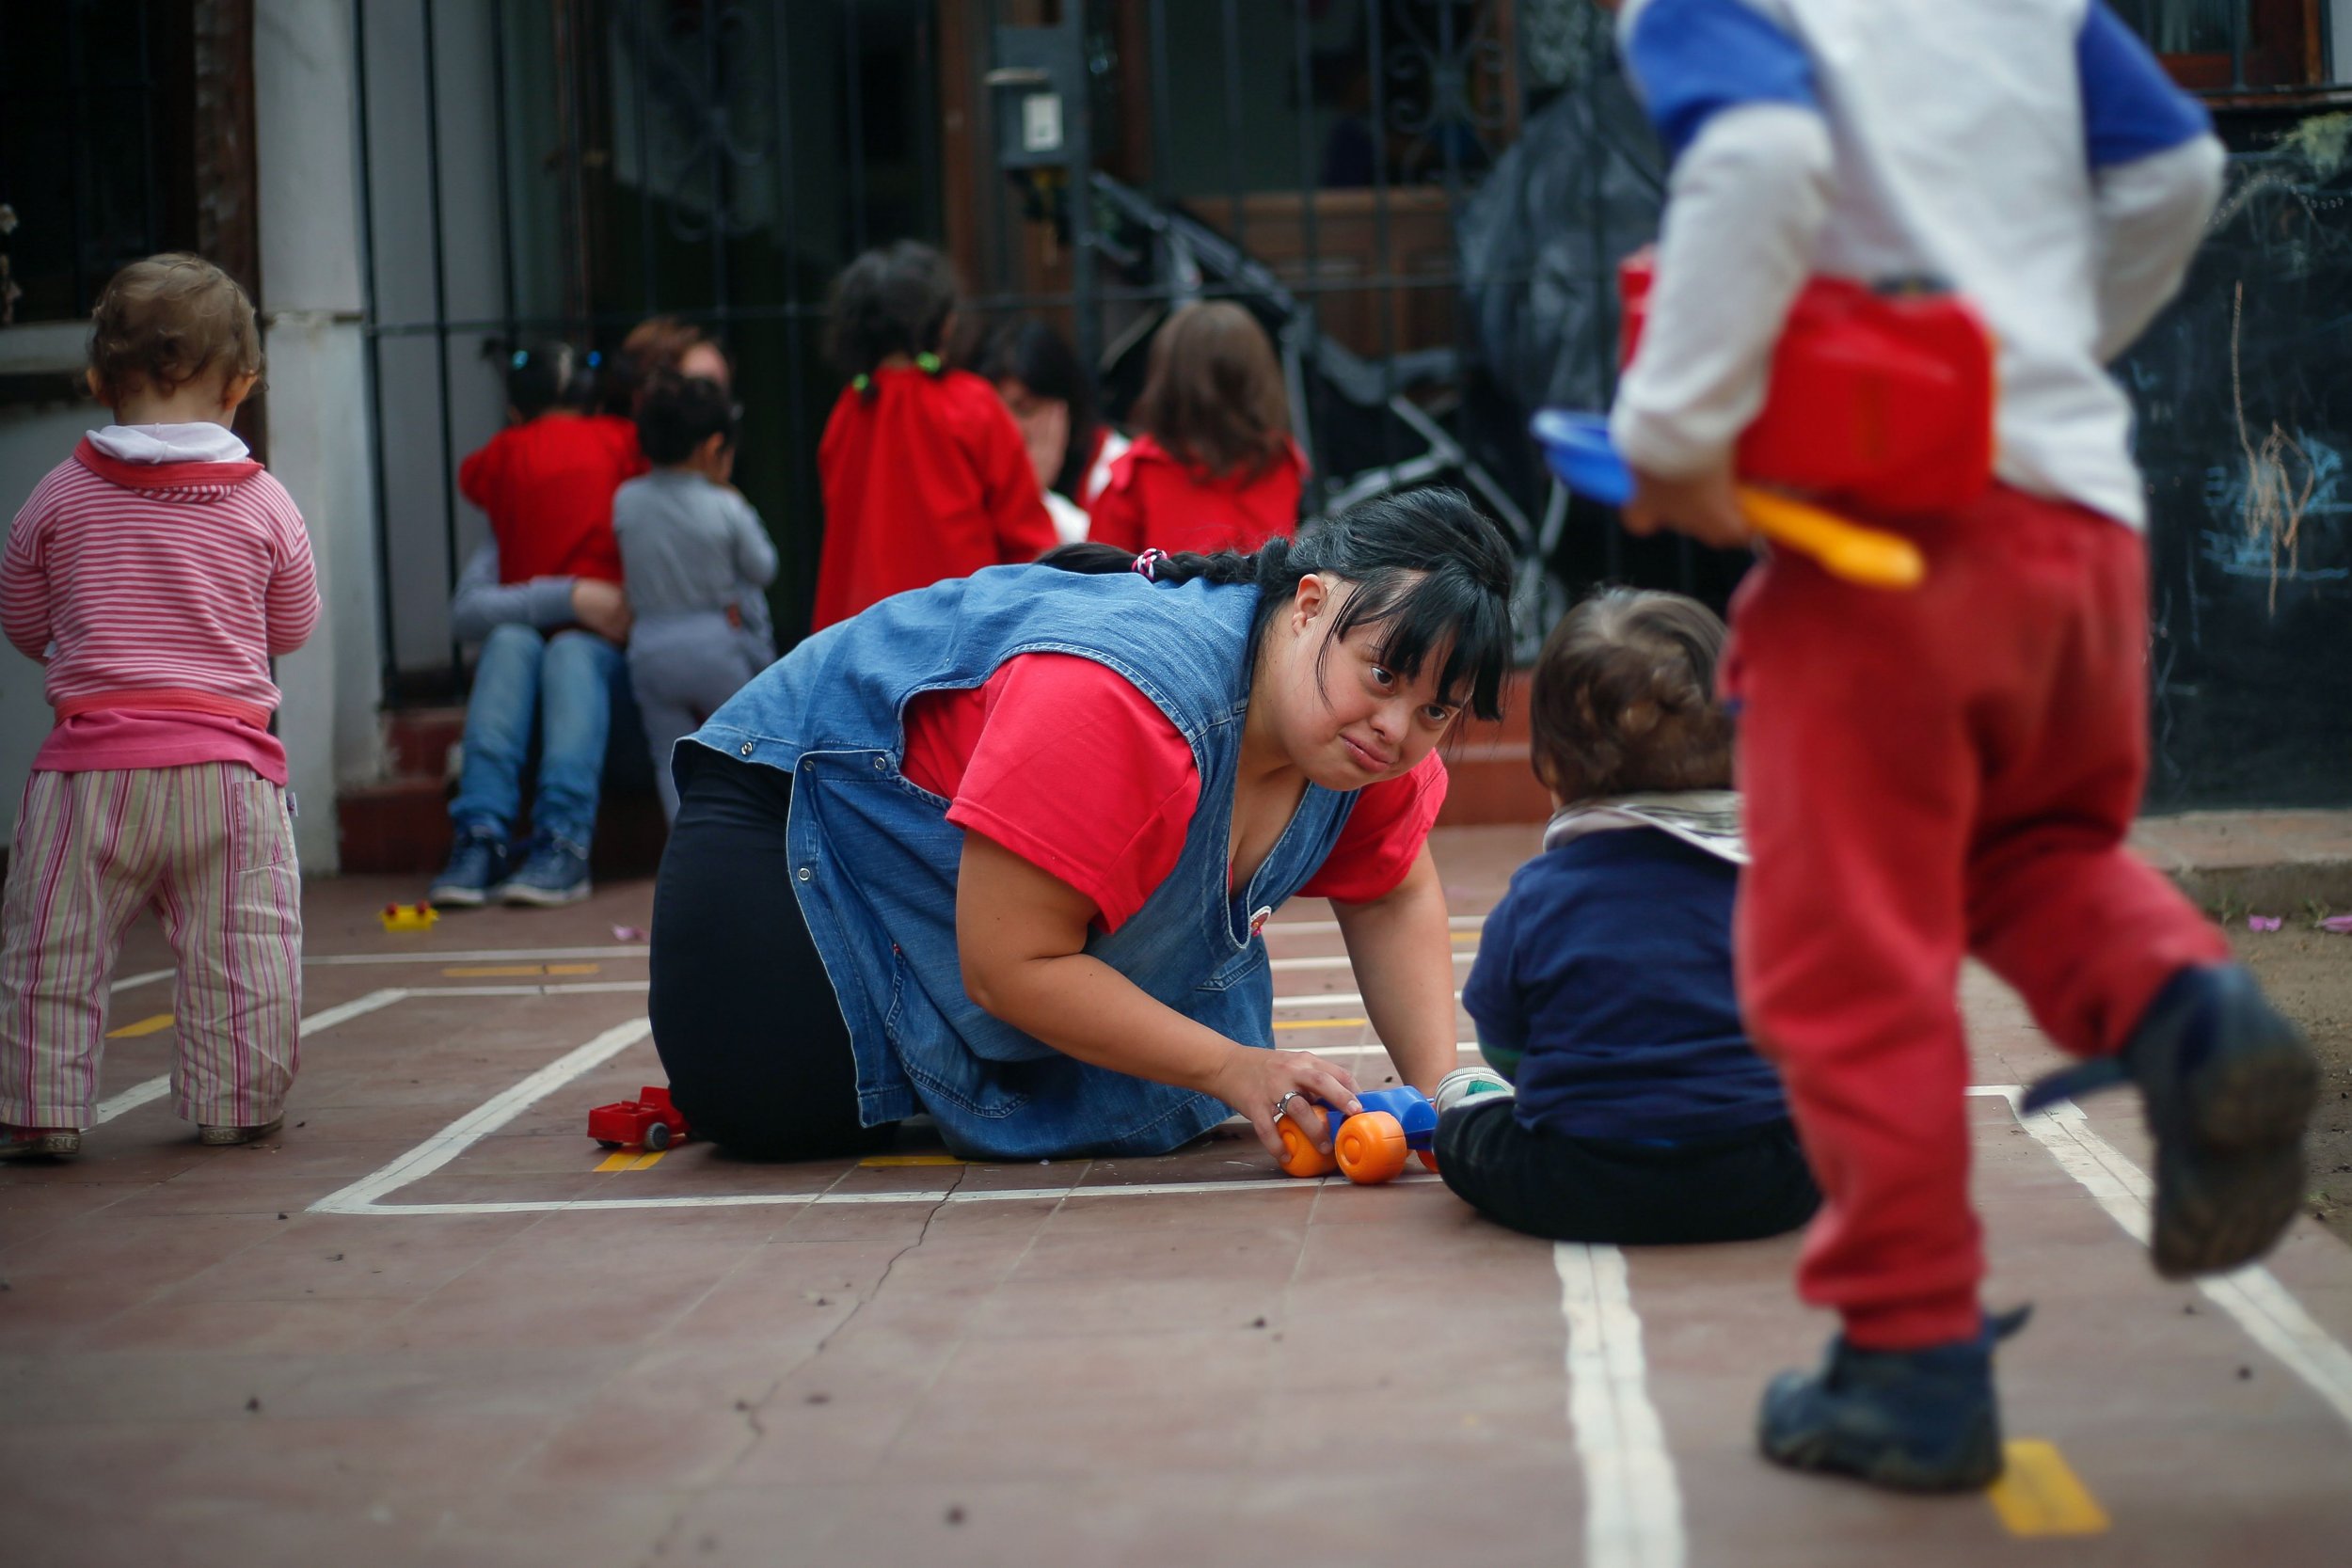 Noelia Garella (C), a kindergarten teacher born with Down Syndrome, plays with children at the Jeromito kindergarten in Cordoba, Argentina on September 29, 2016. When Noelia Garella was a child, a nursery school rejected her as a "monster." Now 31, she is in a class of her own. In the face of prejudice, she is the first person with Down syndrome to work as a kindergarten teacher in Argentina -- and one of few in the world.  / AFP PHOTO / DIEGO LIMADIEGO LIMA/AFP/Getty Images